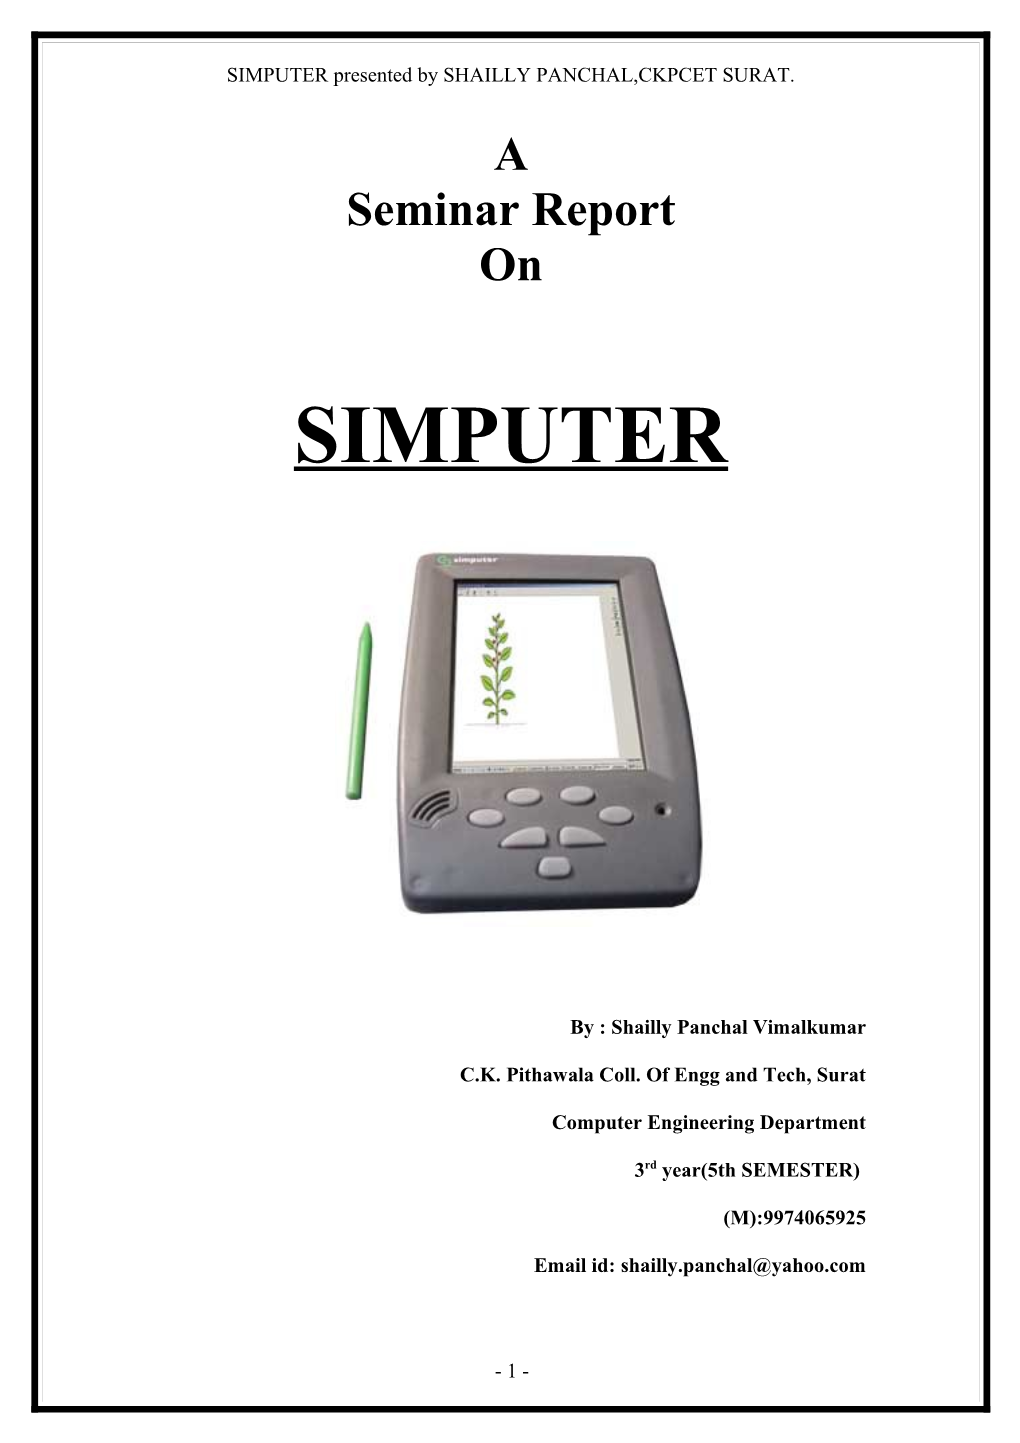 SIMPUTER Presented by SHAILLY PANCHAL,CKPCET SURAT